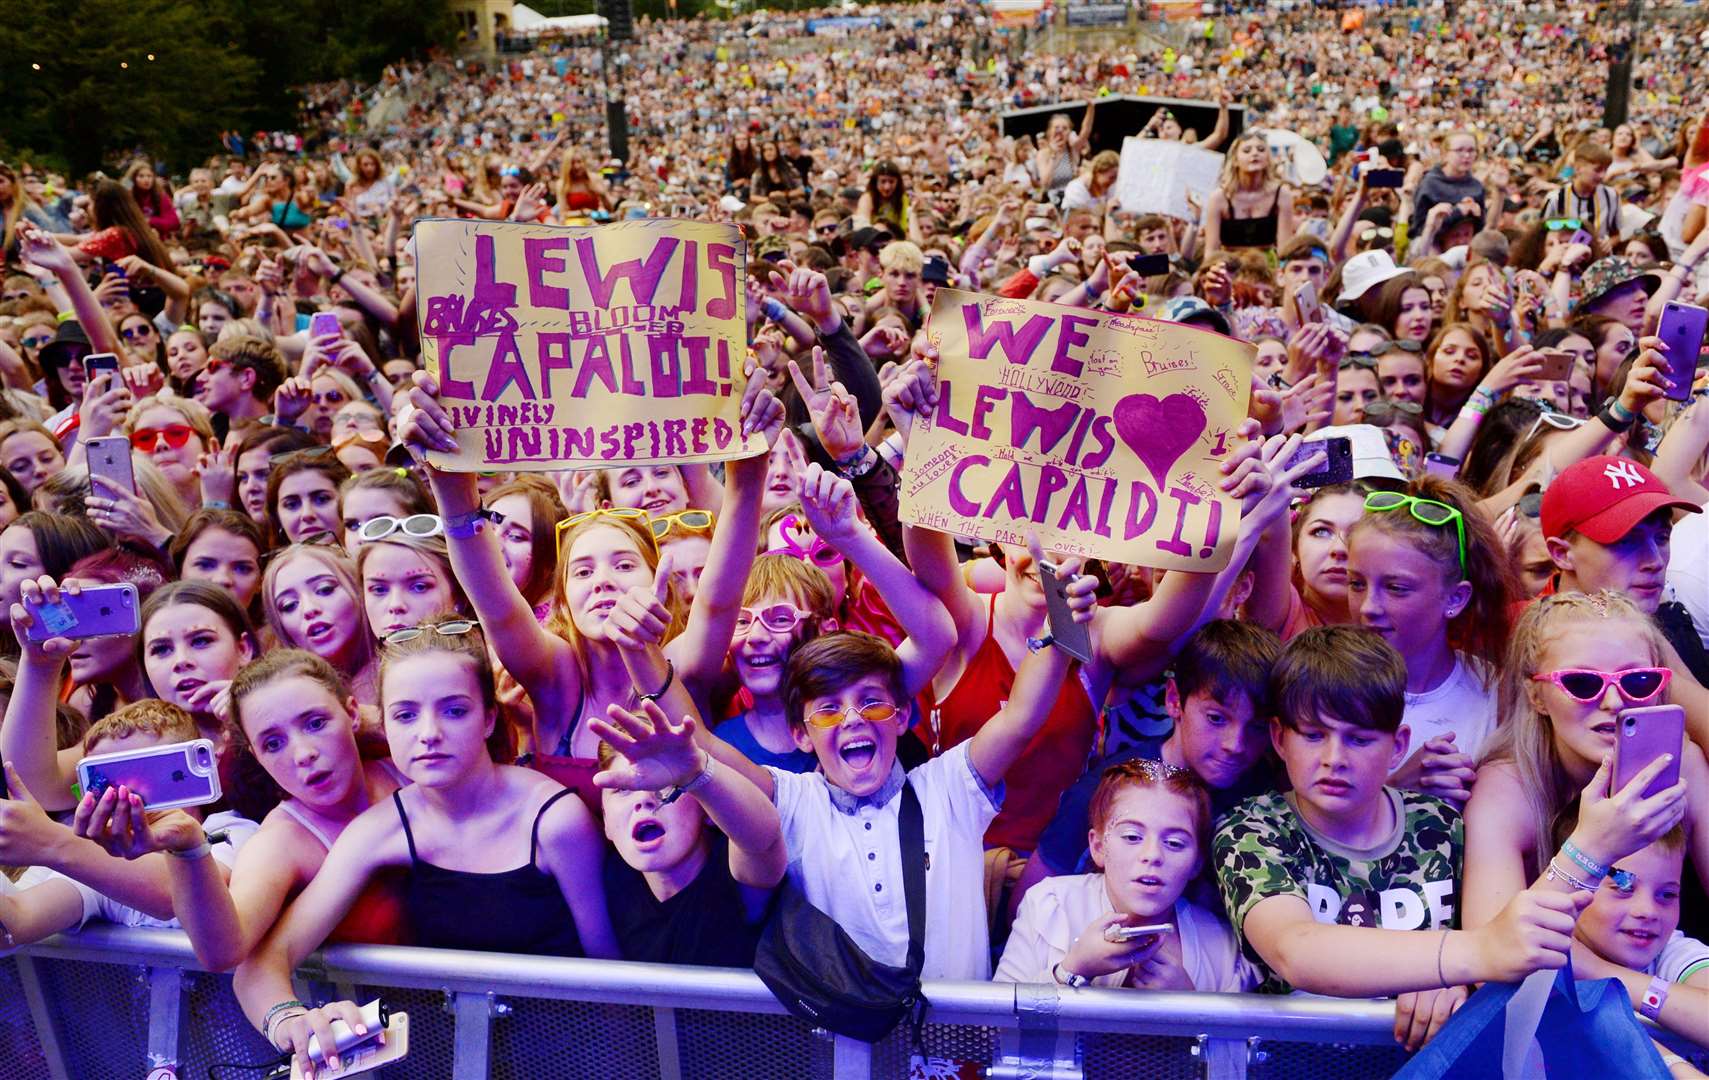 Belladrum welcomes on average 21,000 festival-goers every year.